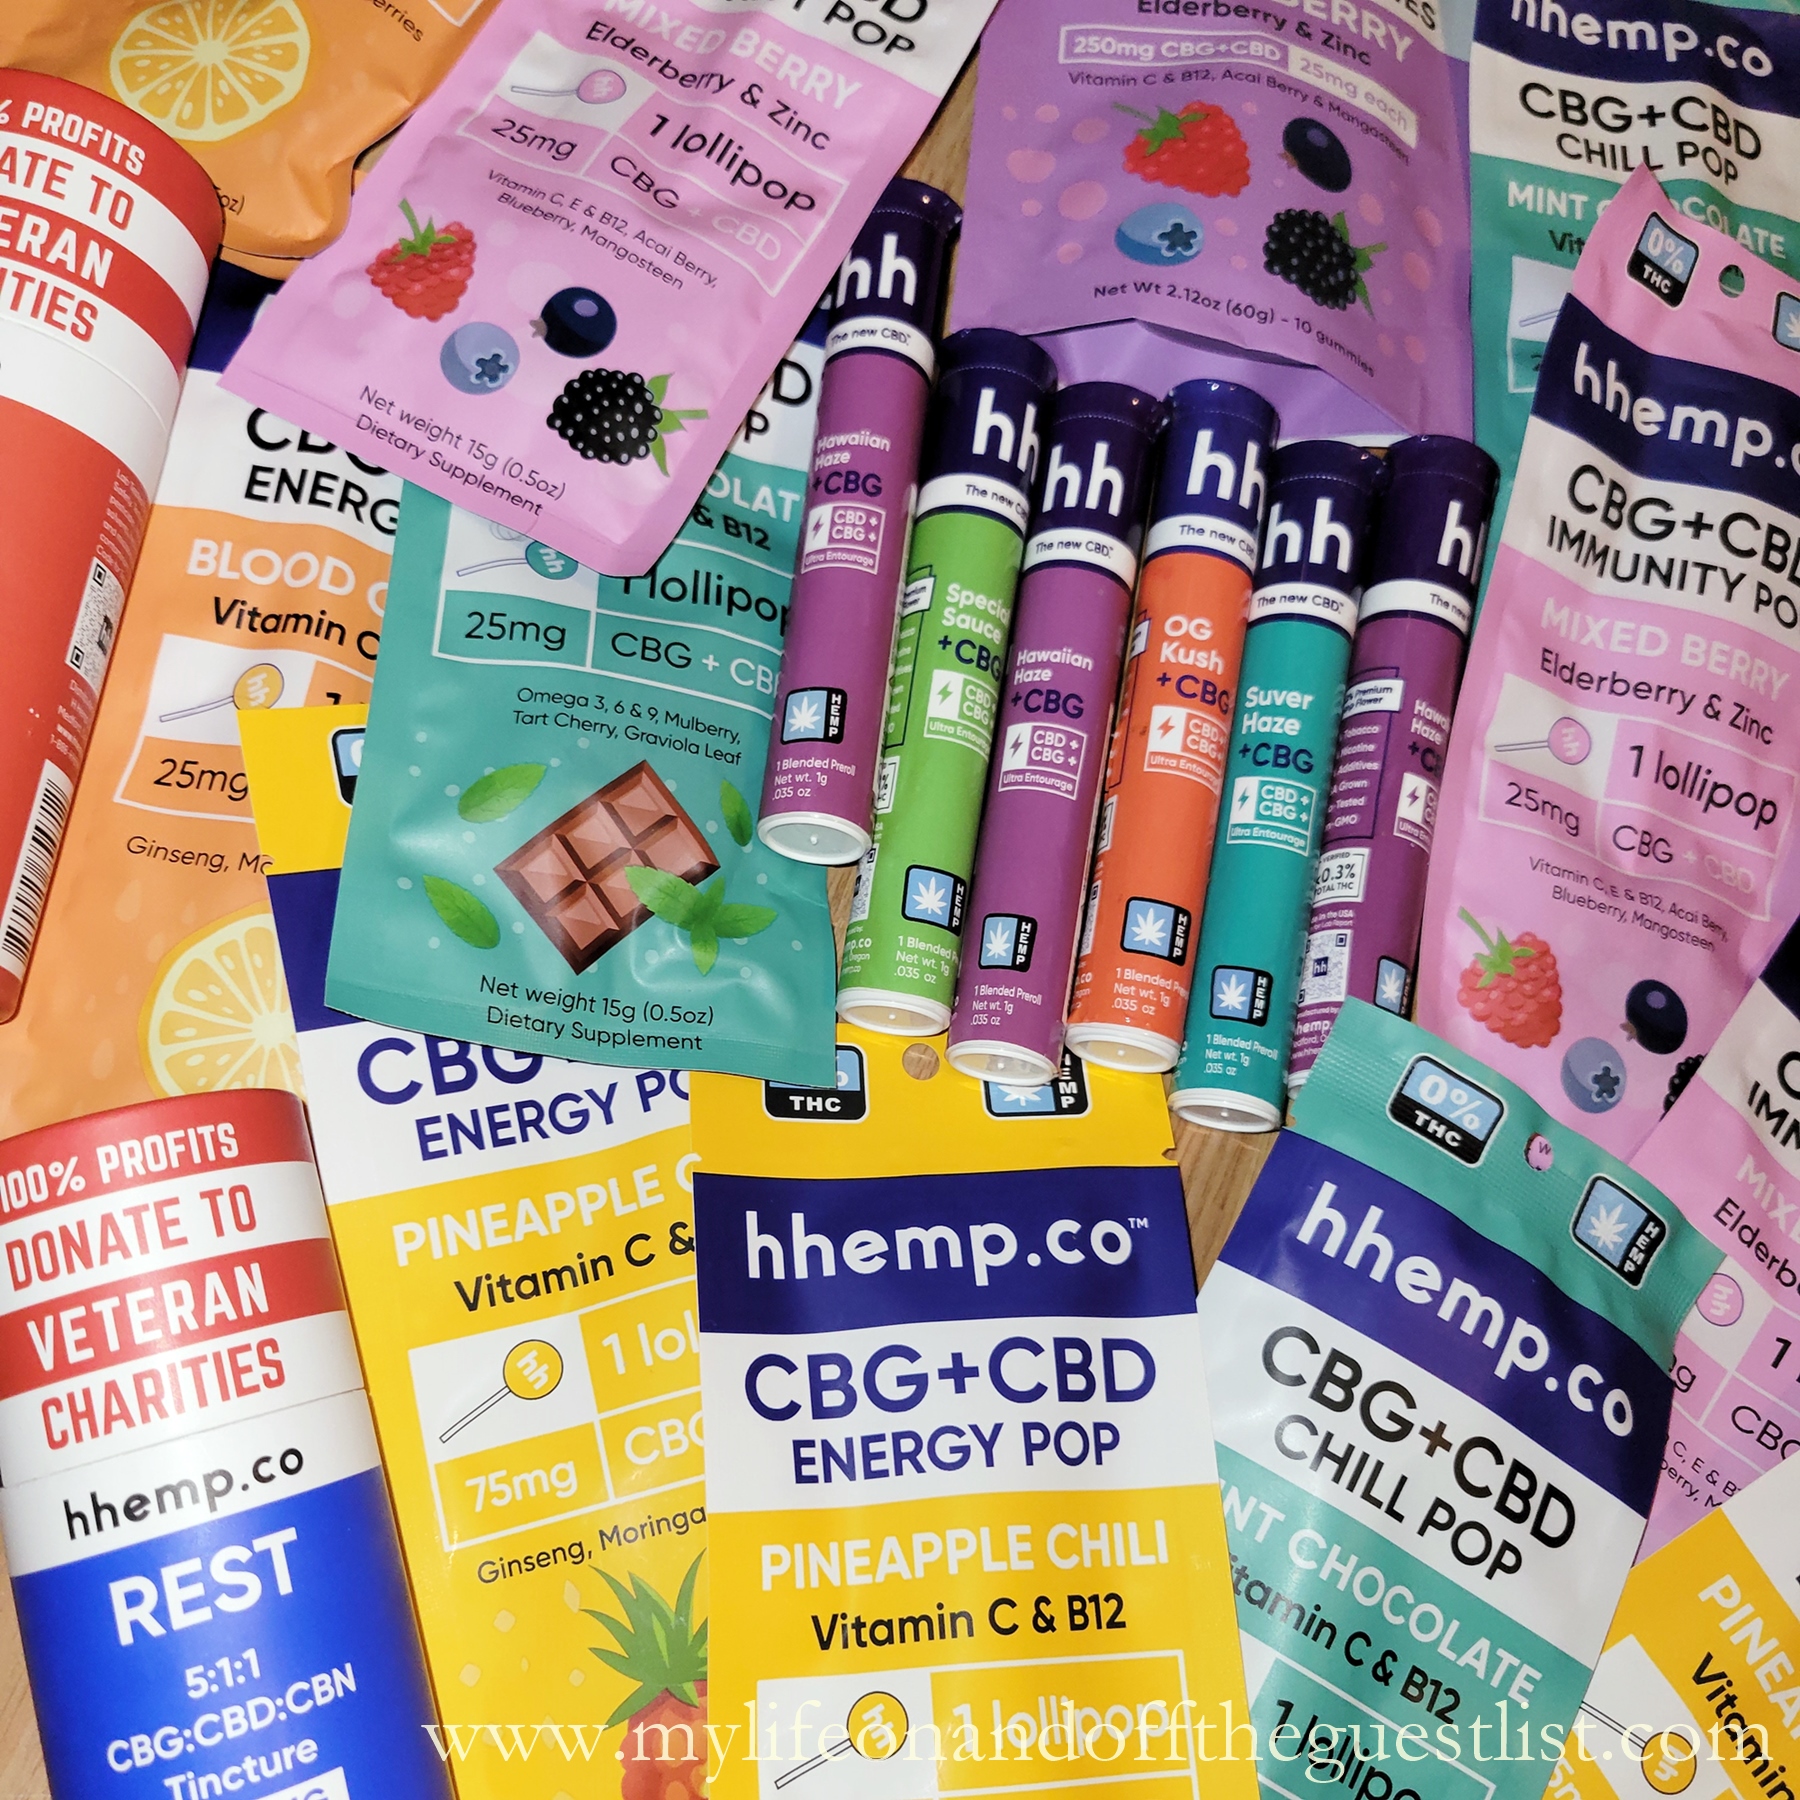 Hhemp.co's CBD Offerings to Commemorate National CBD Month